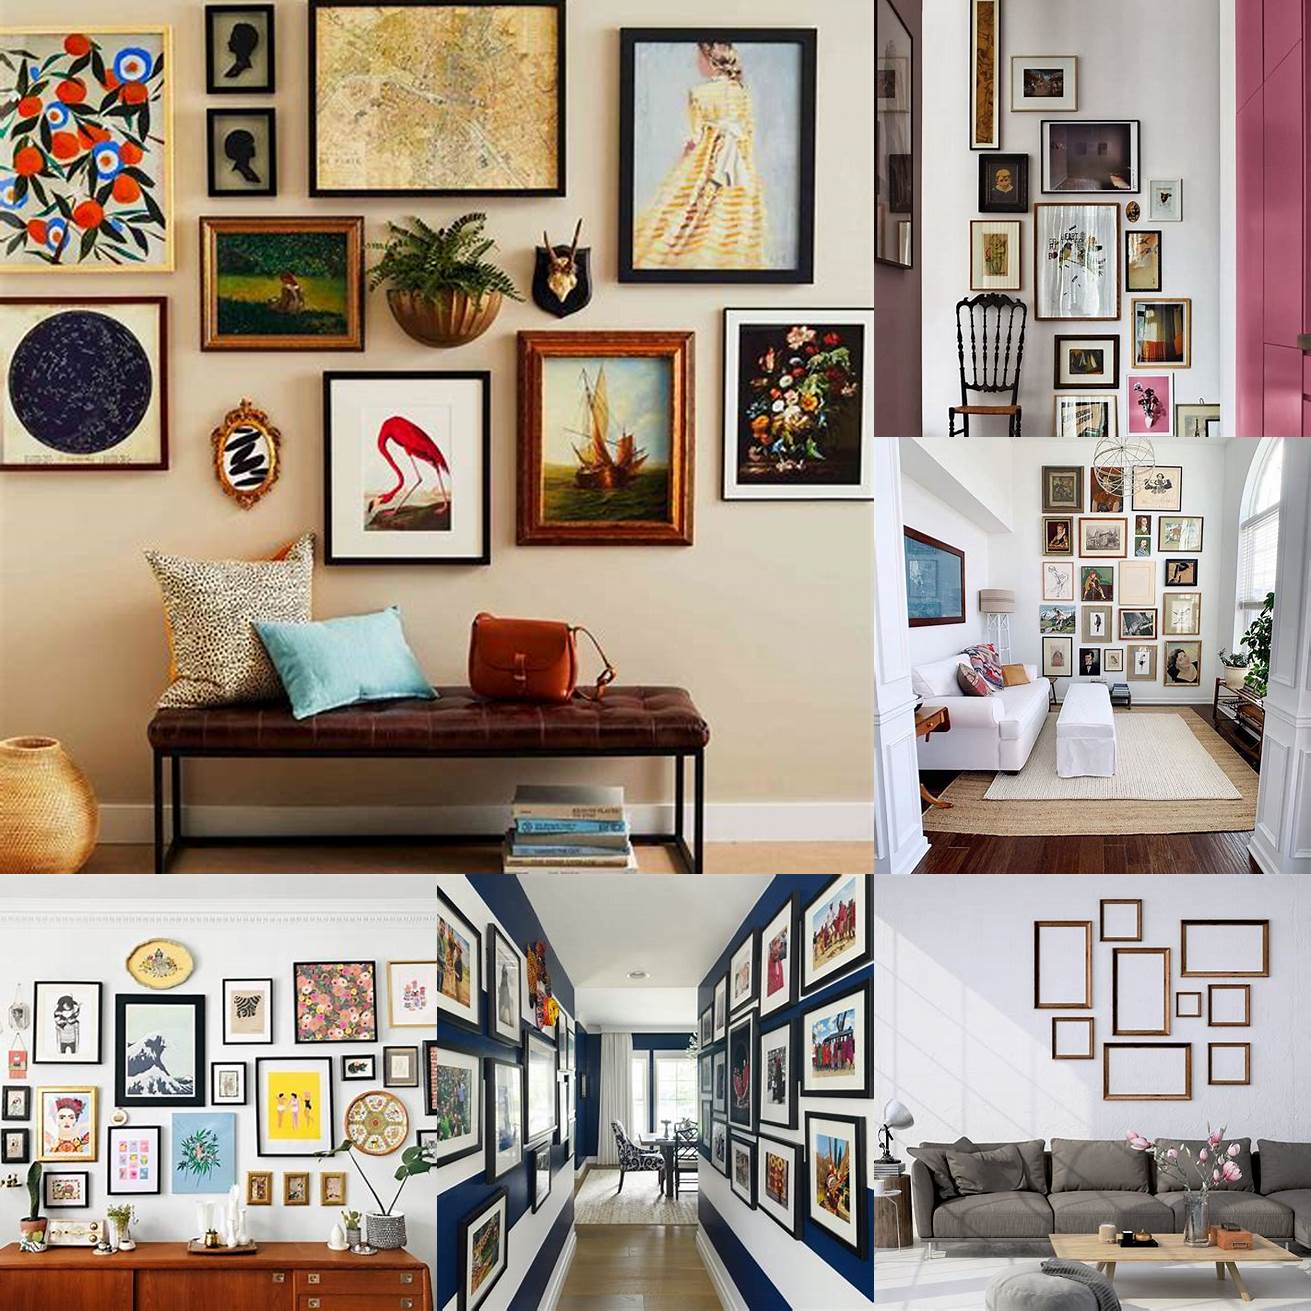 3 Use a gallery wall to showcase your favorite artwork